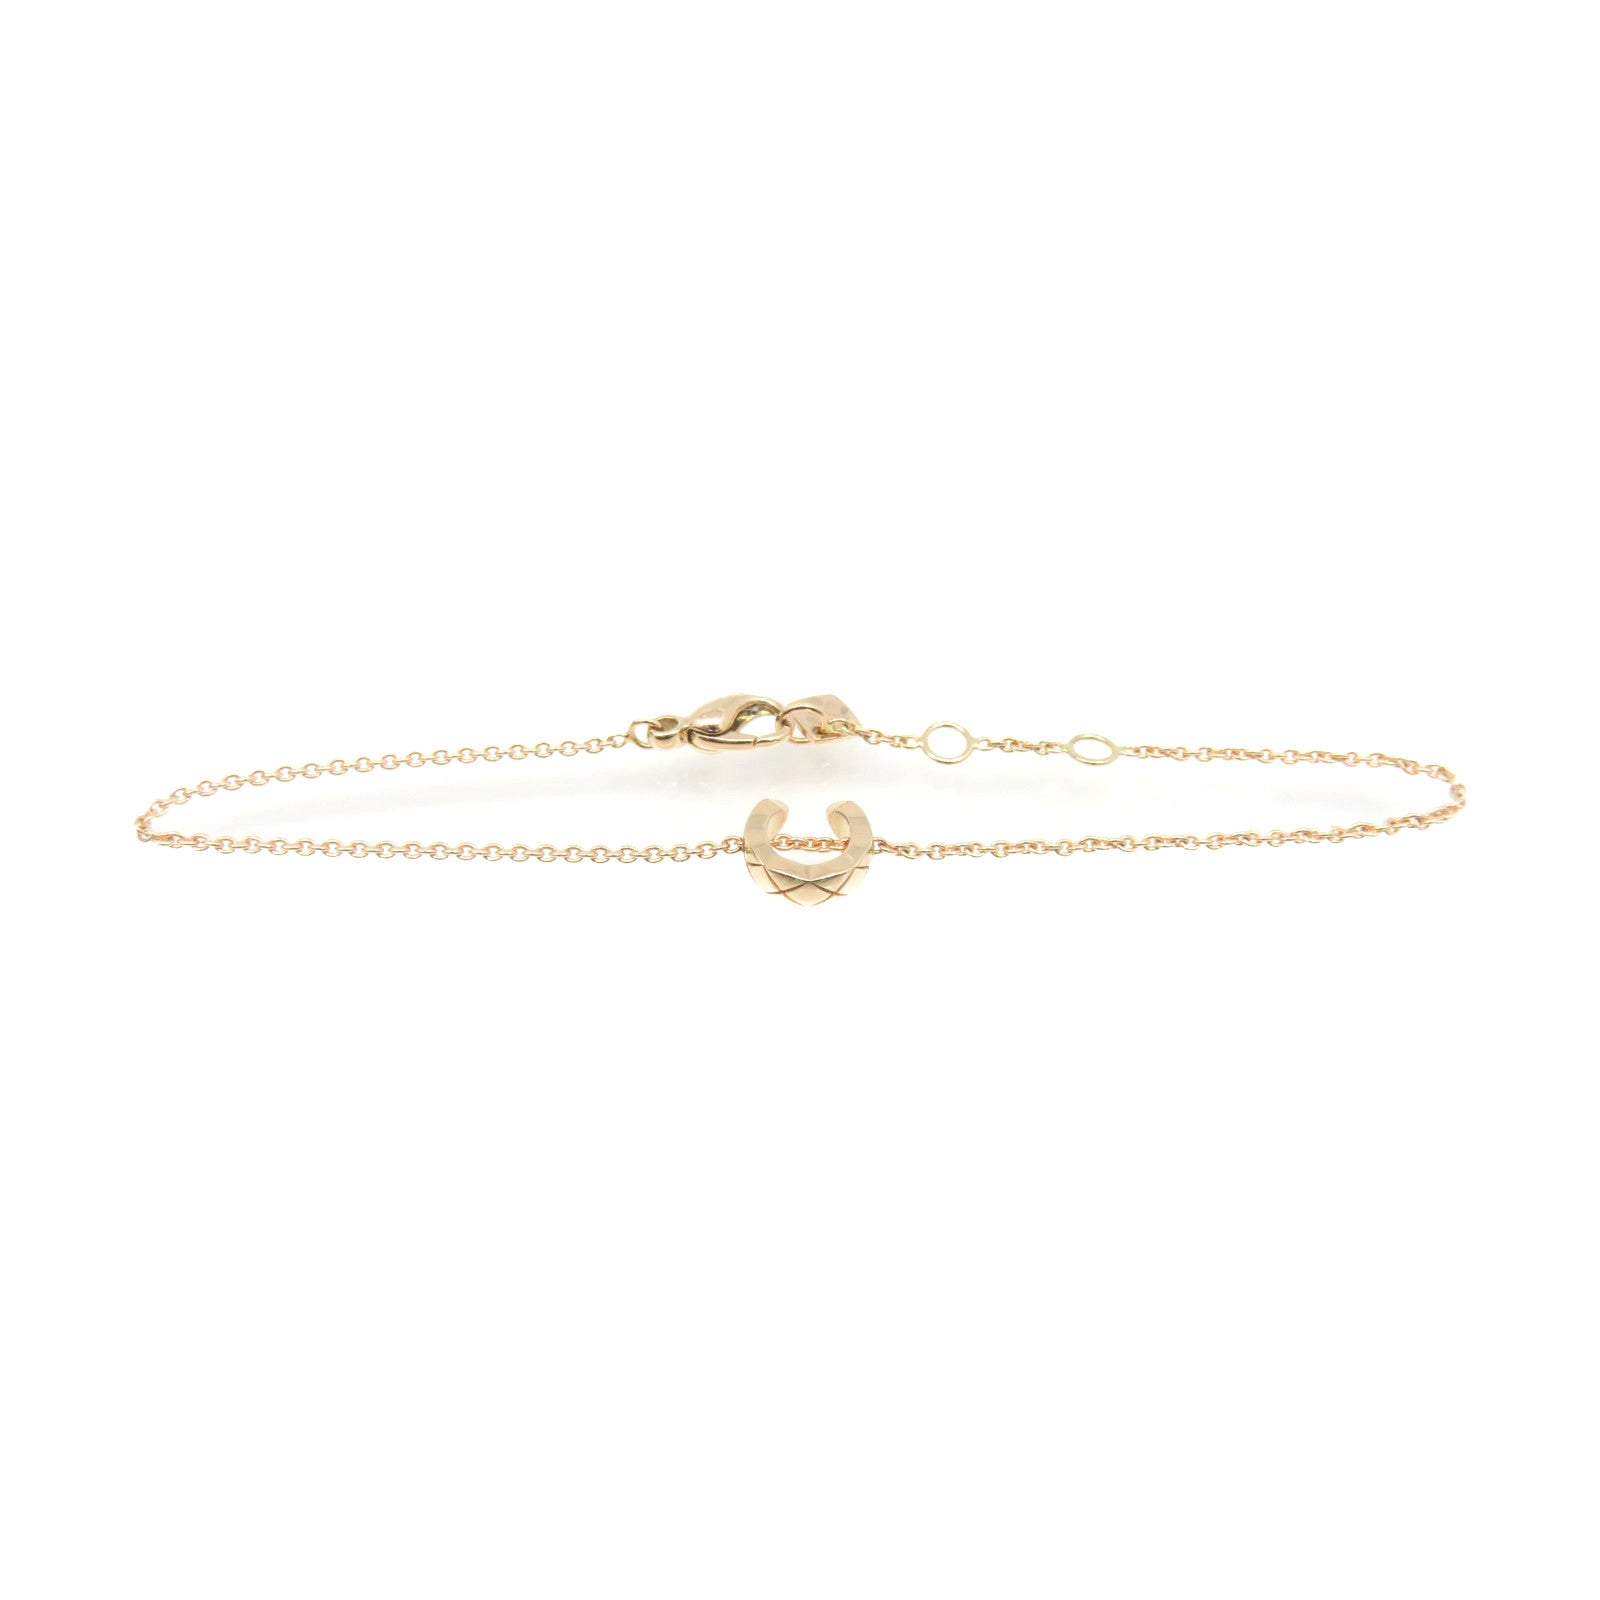 Shop CHANEL COCO CRUSH Costume Jewelry Casual Style Party Style 18K Gold ( J12303) by coco.ladybird